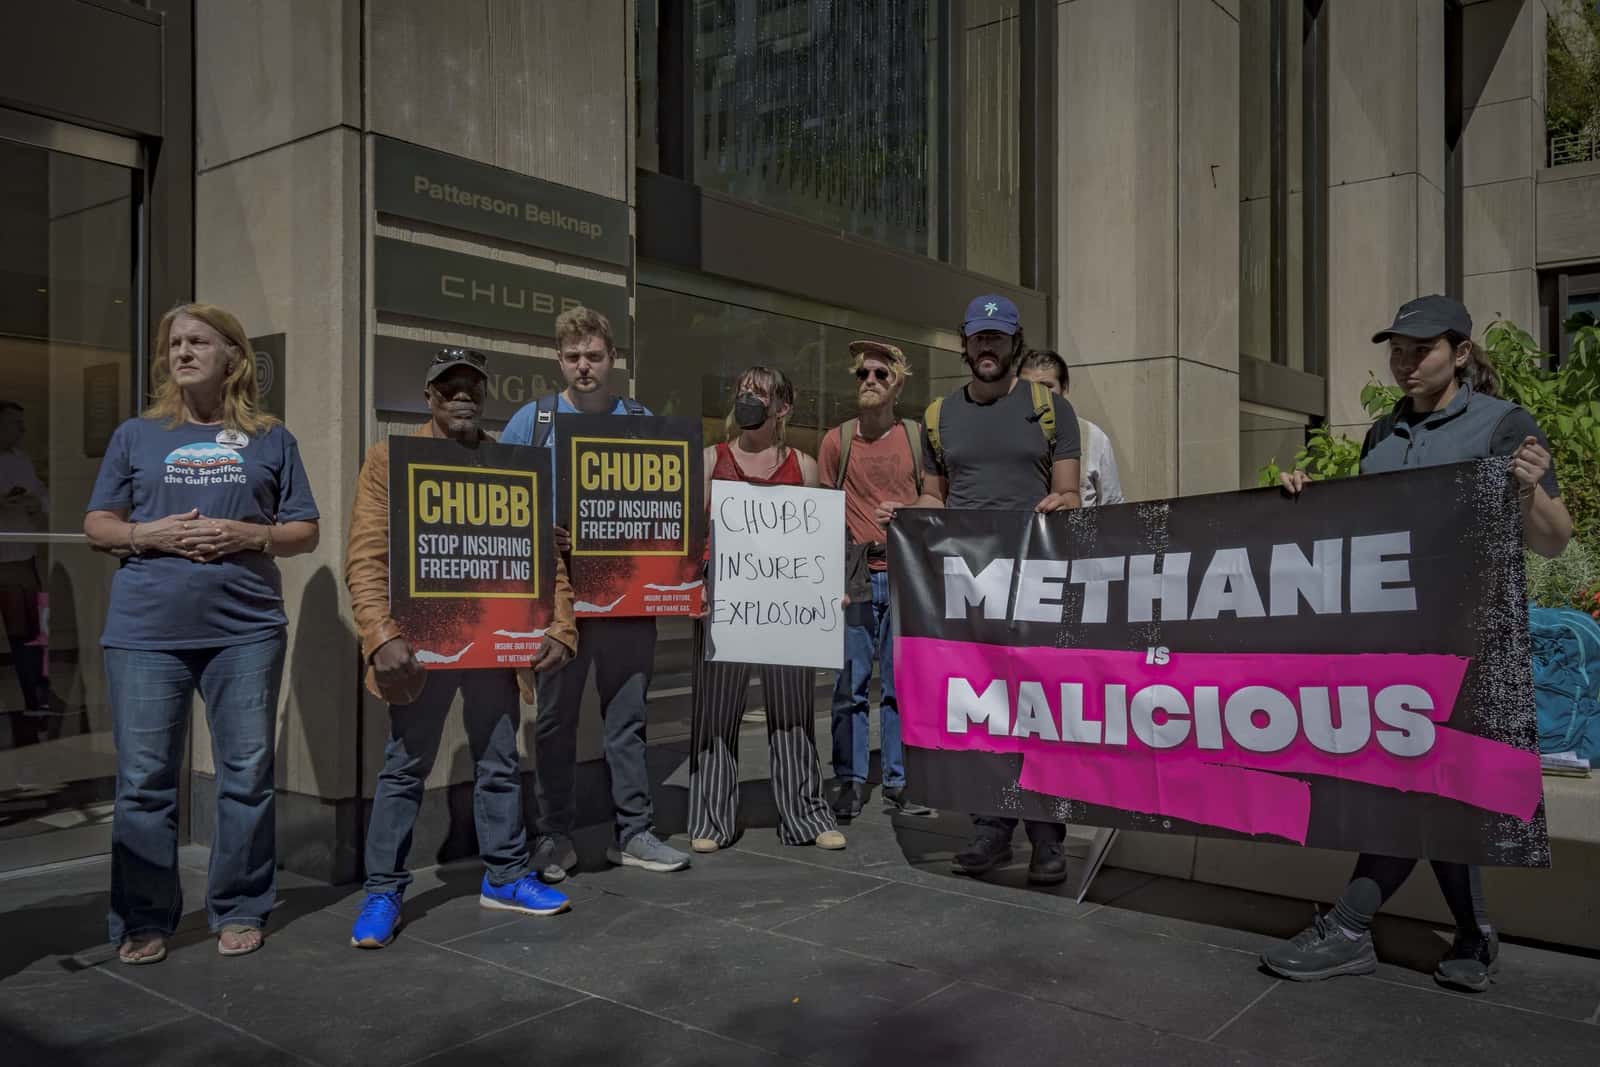 A group of people standing in a row holding protest signs that read "Methane is Malicious."